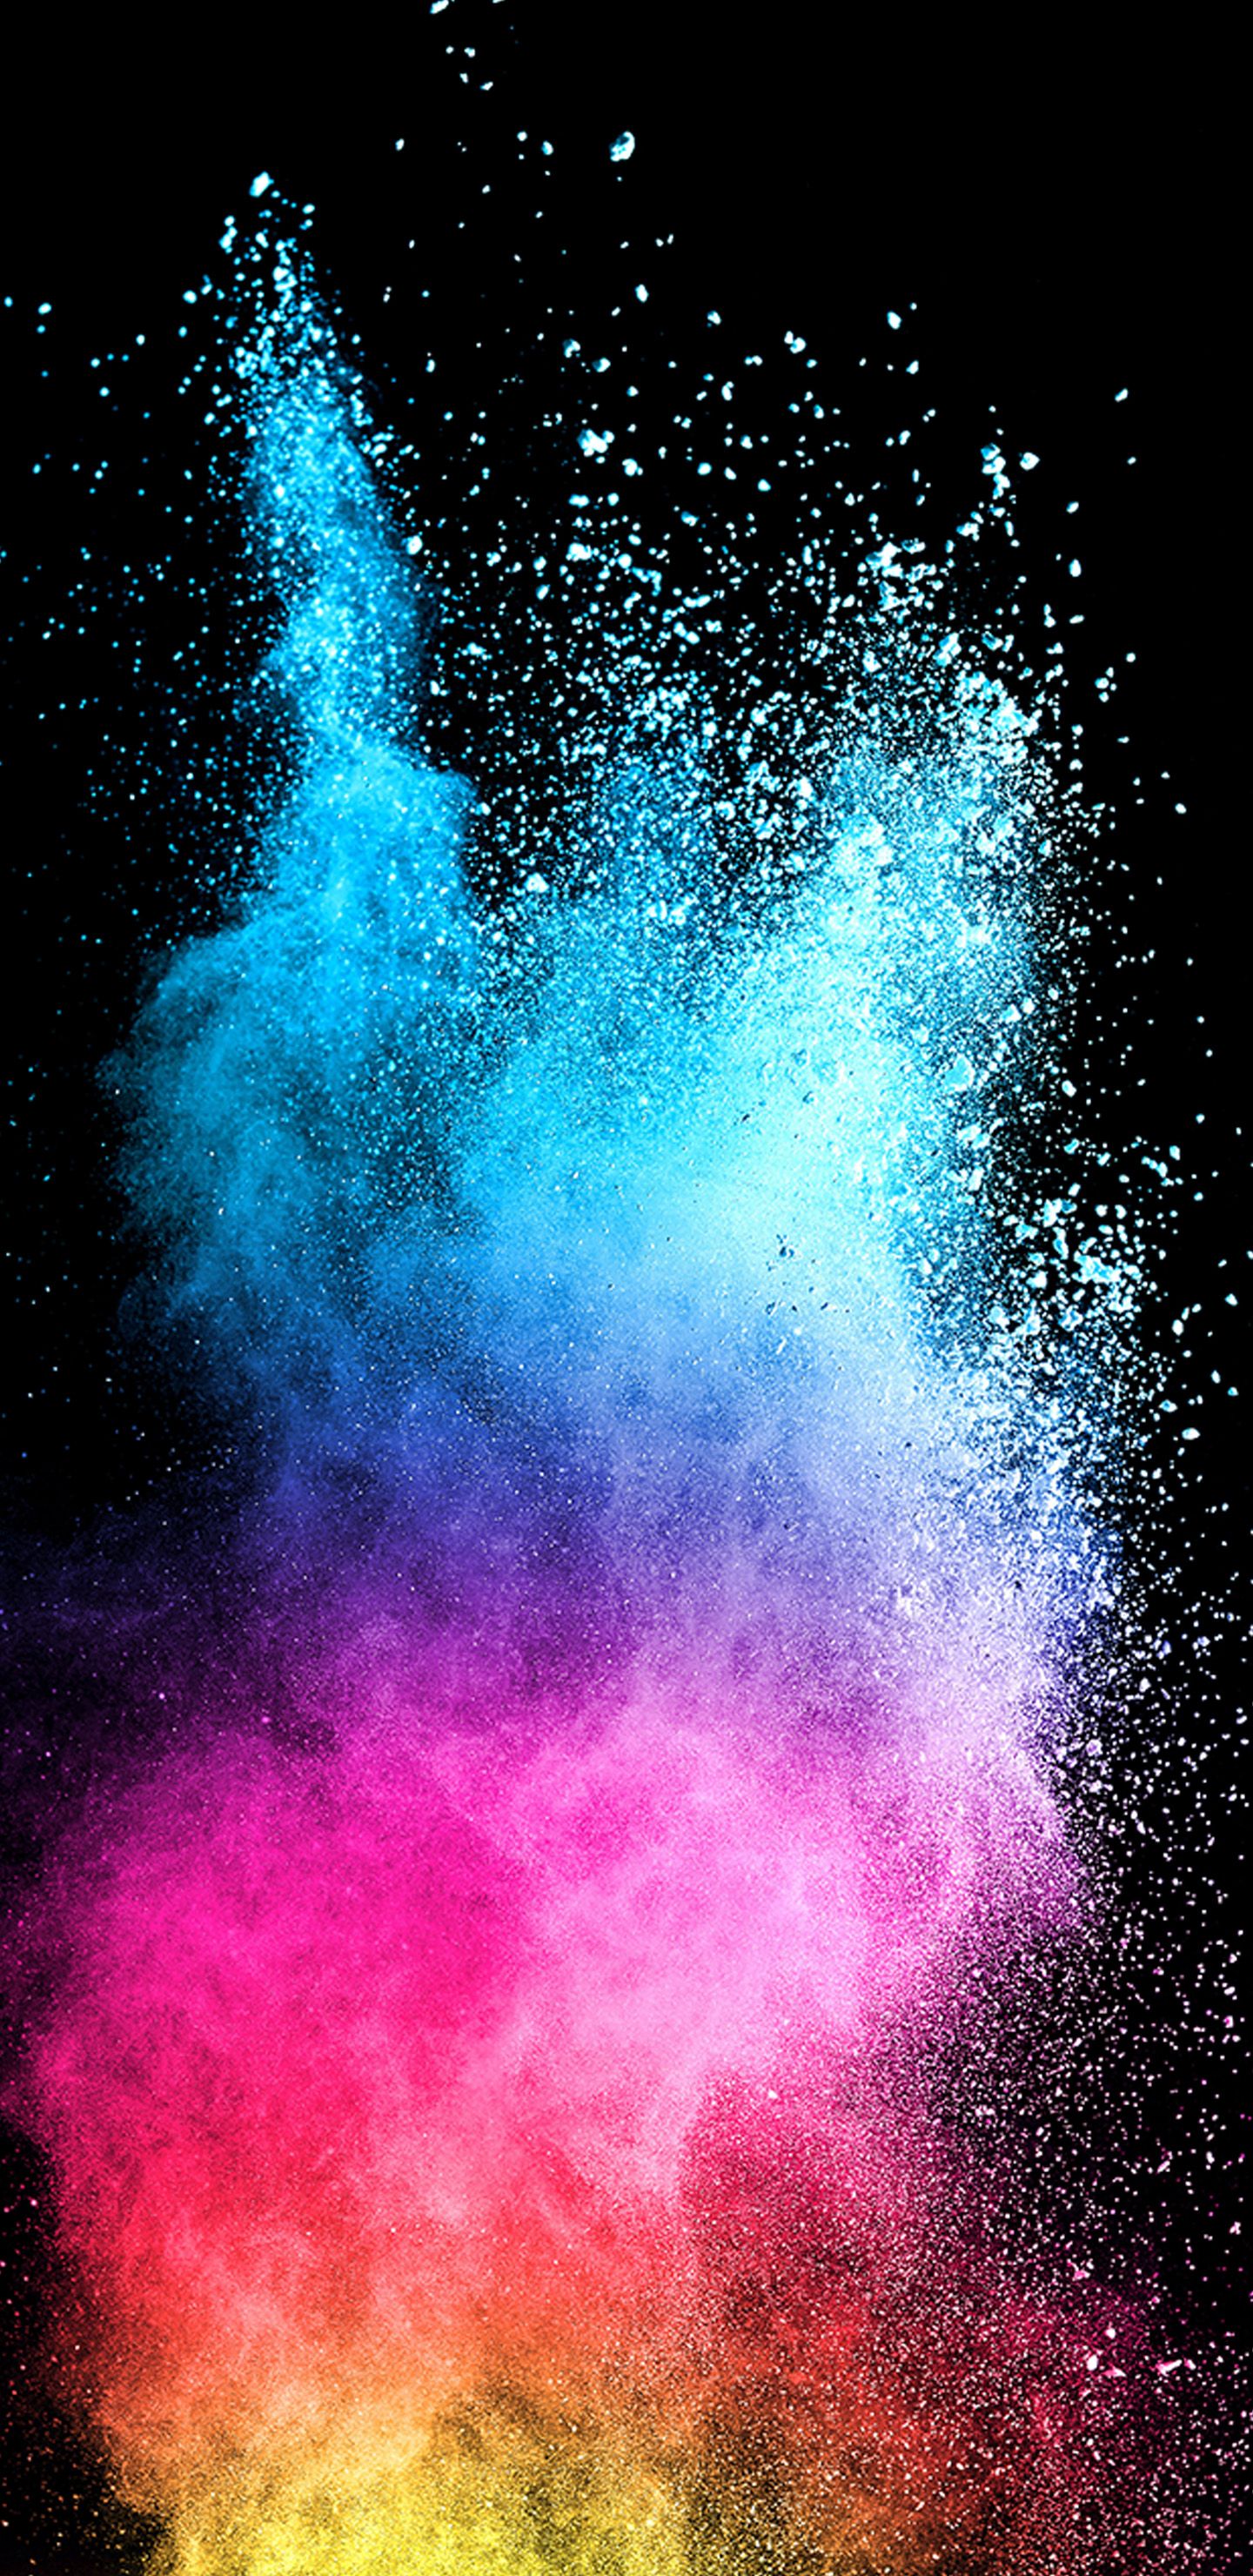 Abstract Colorful Powder with Dark Background for Samsung Galaxy S9 Series Wallpaper Wallpaper. Wallpaper Download. High Resolution Wallpaper